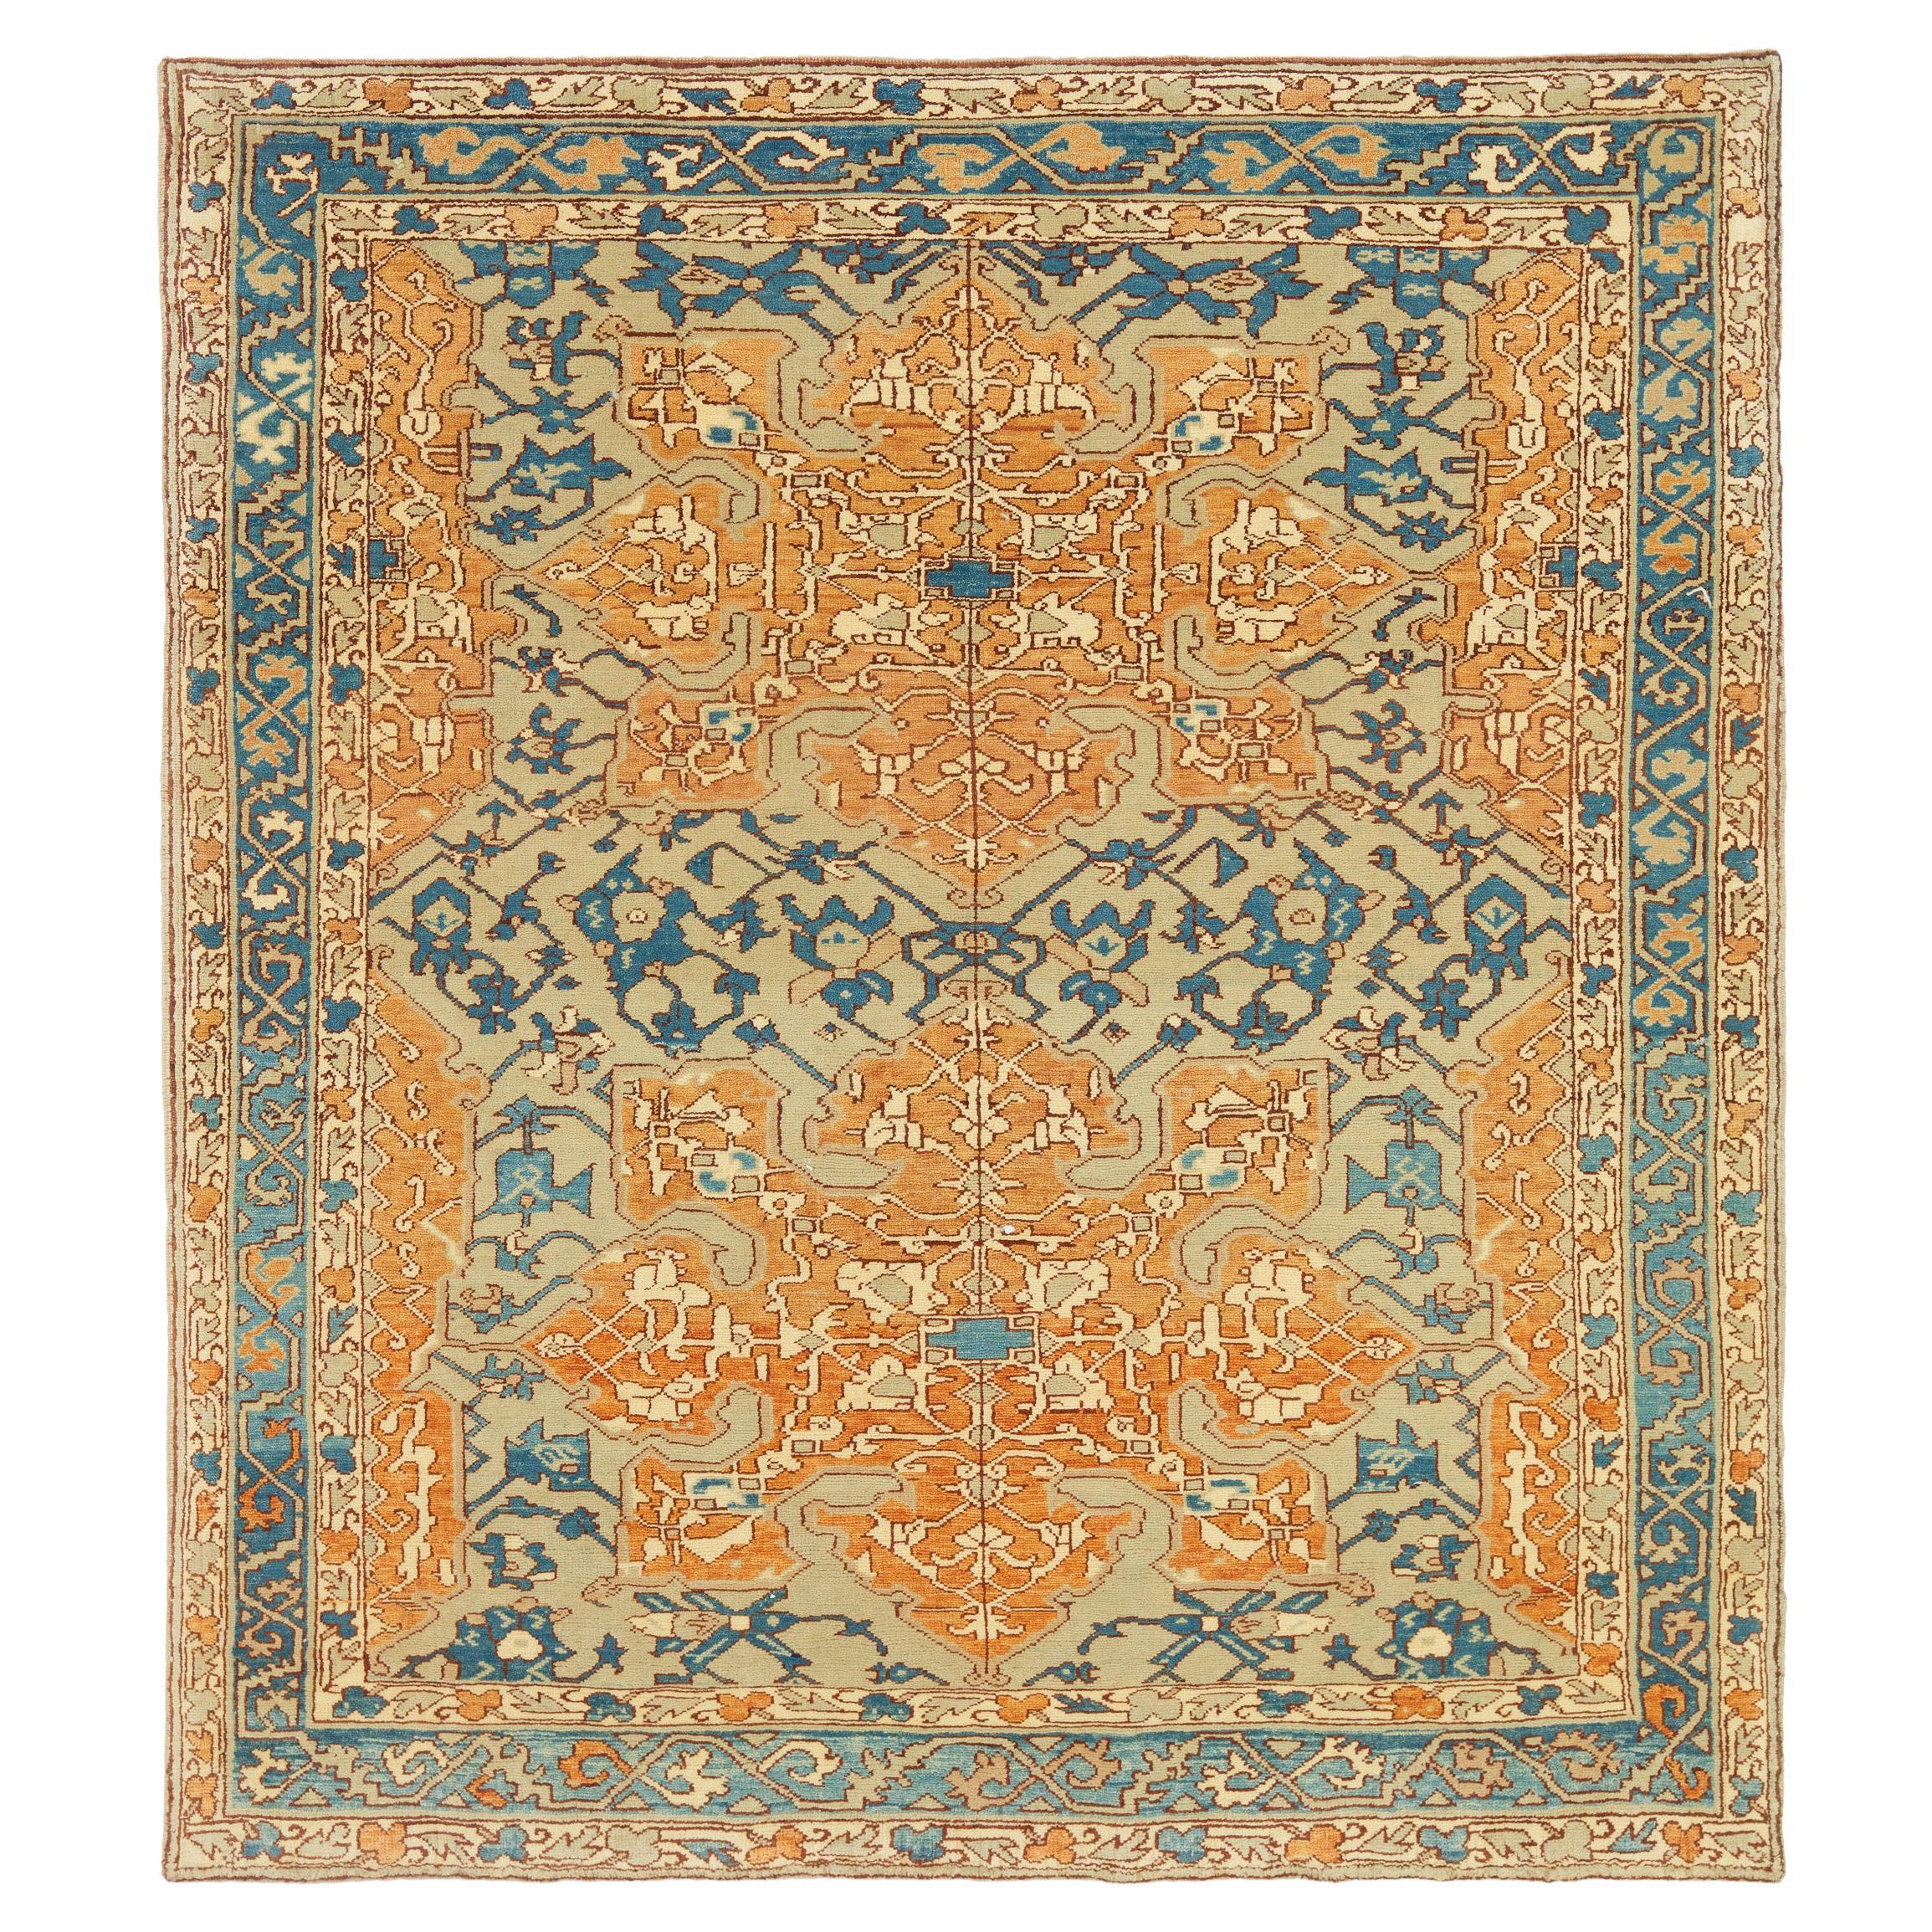 Ararat Rugs Star Ushak Carpet 16th Century Museum Piece Revival Rug Natural Dyed For Sale